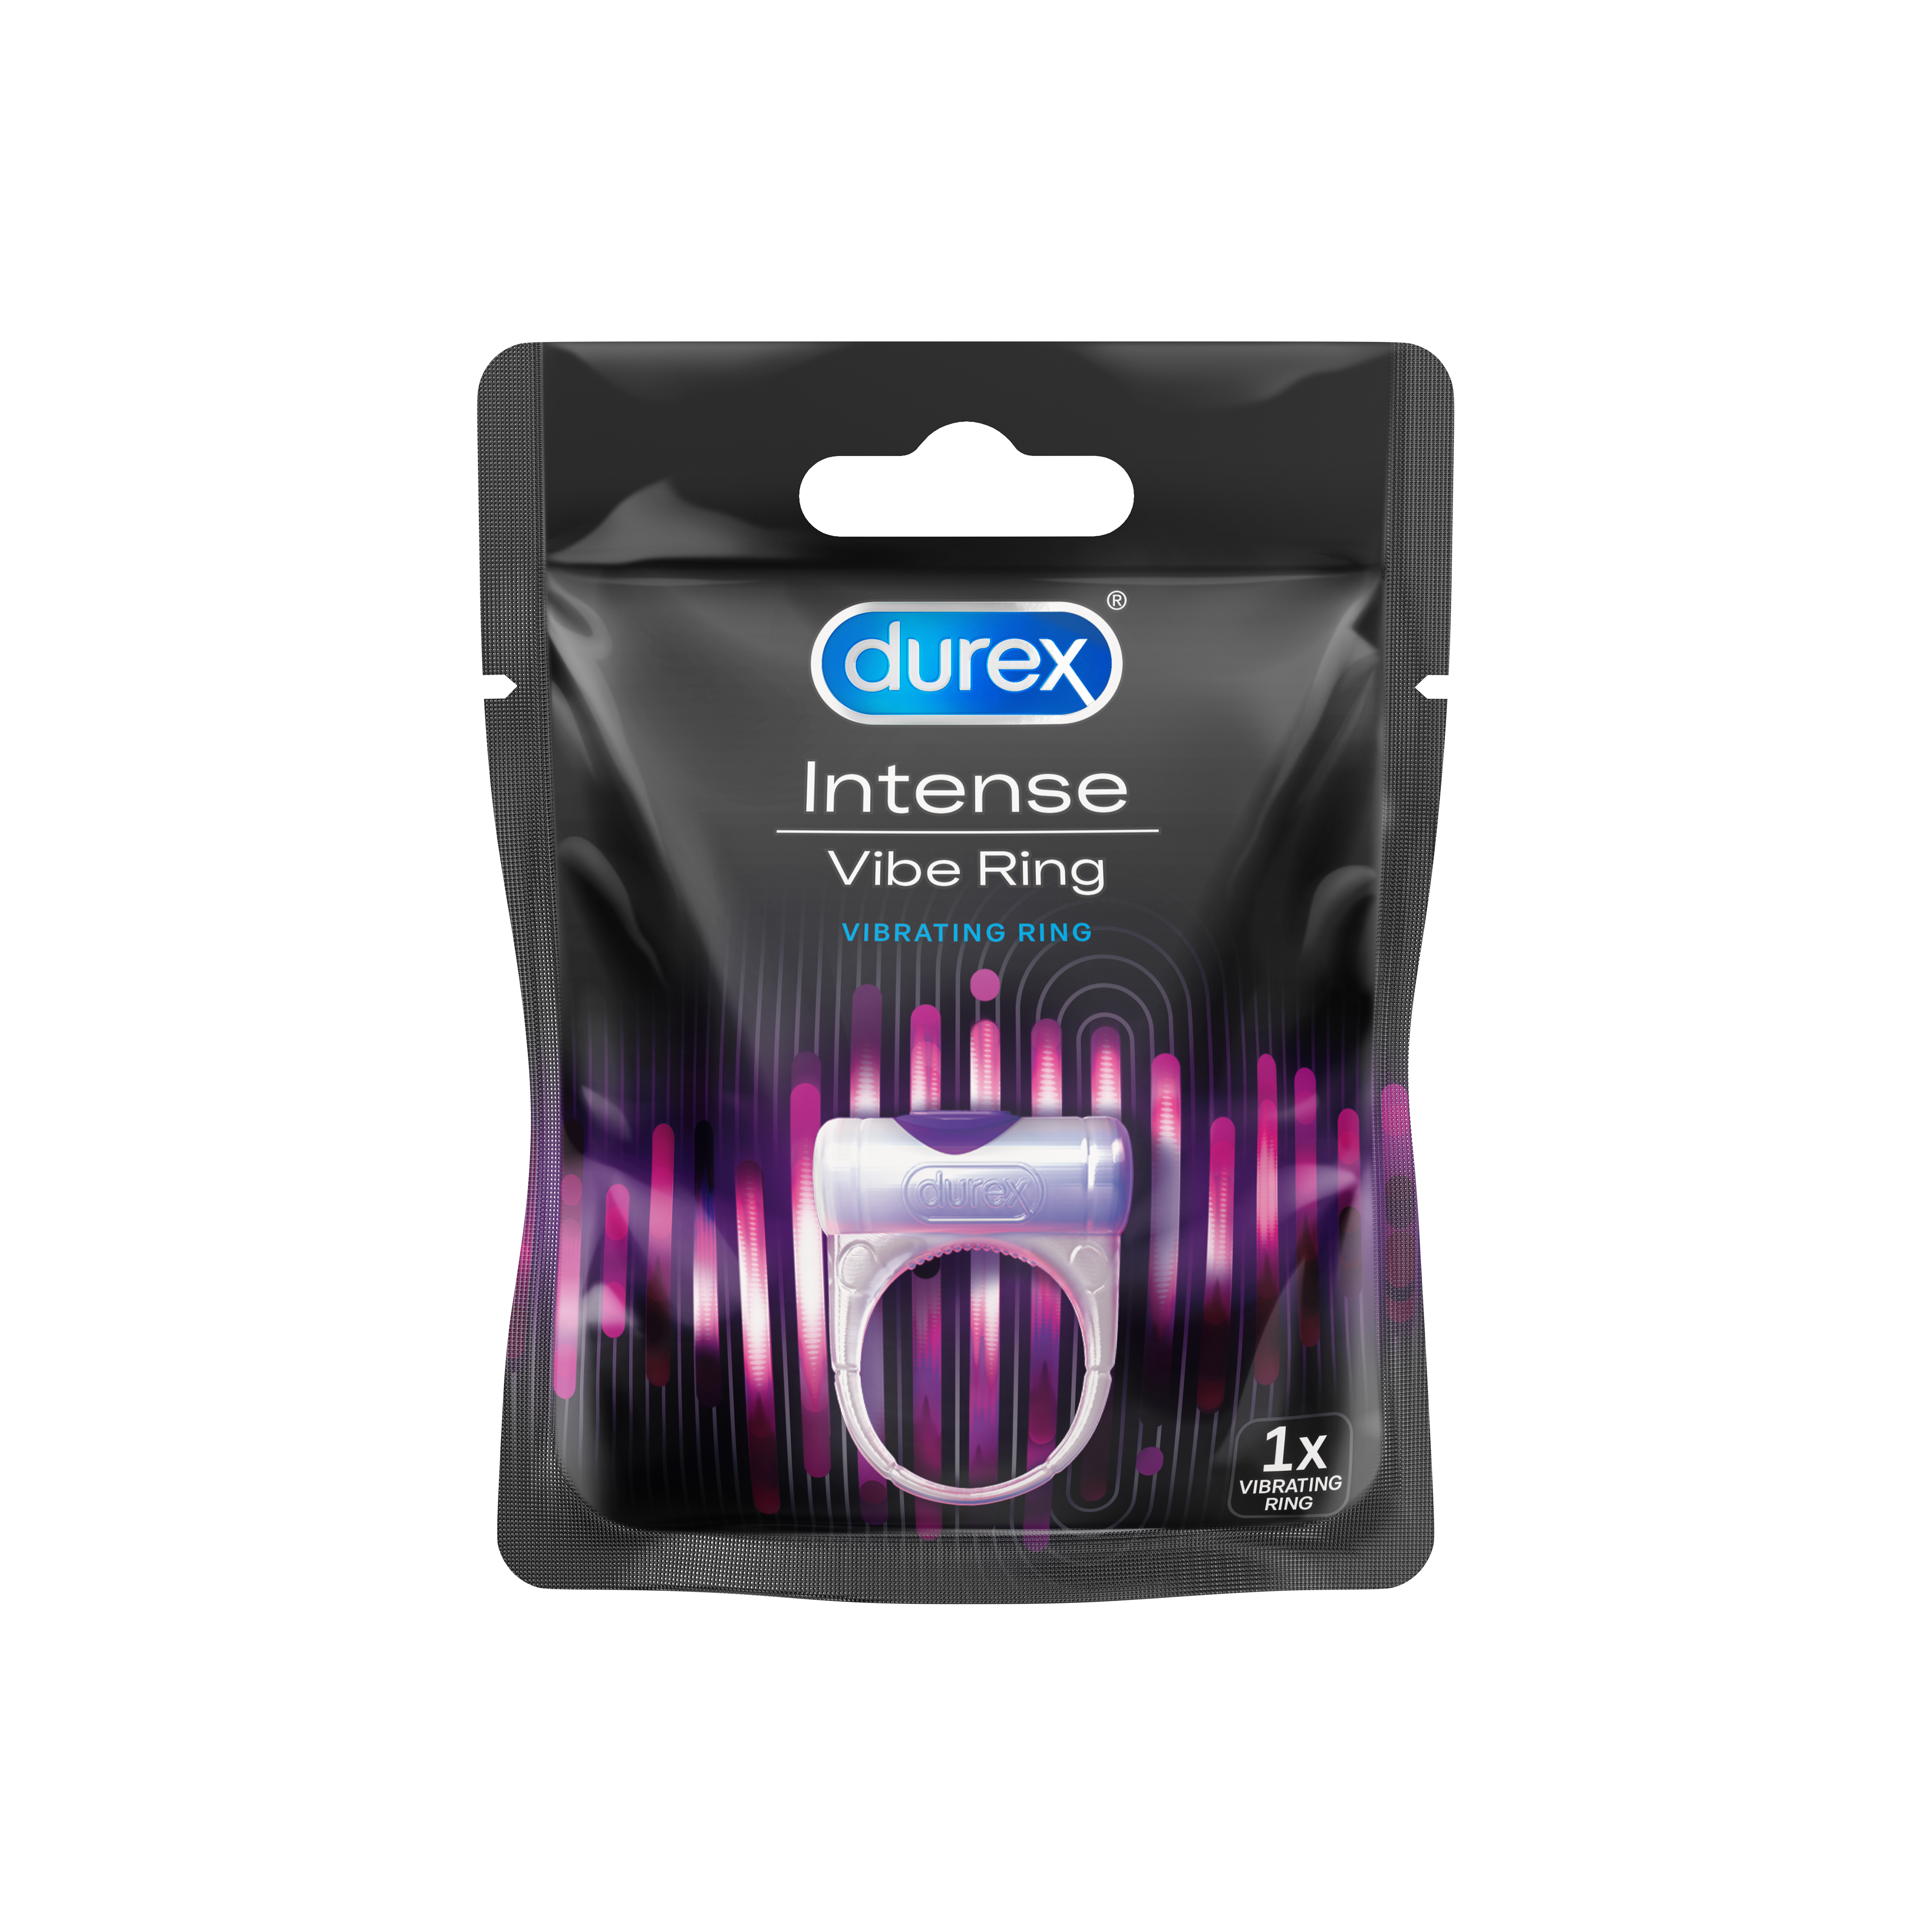 Durex Intense Vibe Ring for Extra Pleasure for Men & Women: Buy packet of  1.0 Unit at best price in India | 1mg